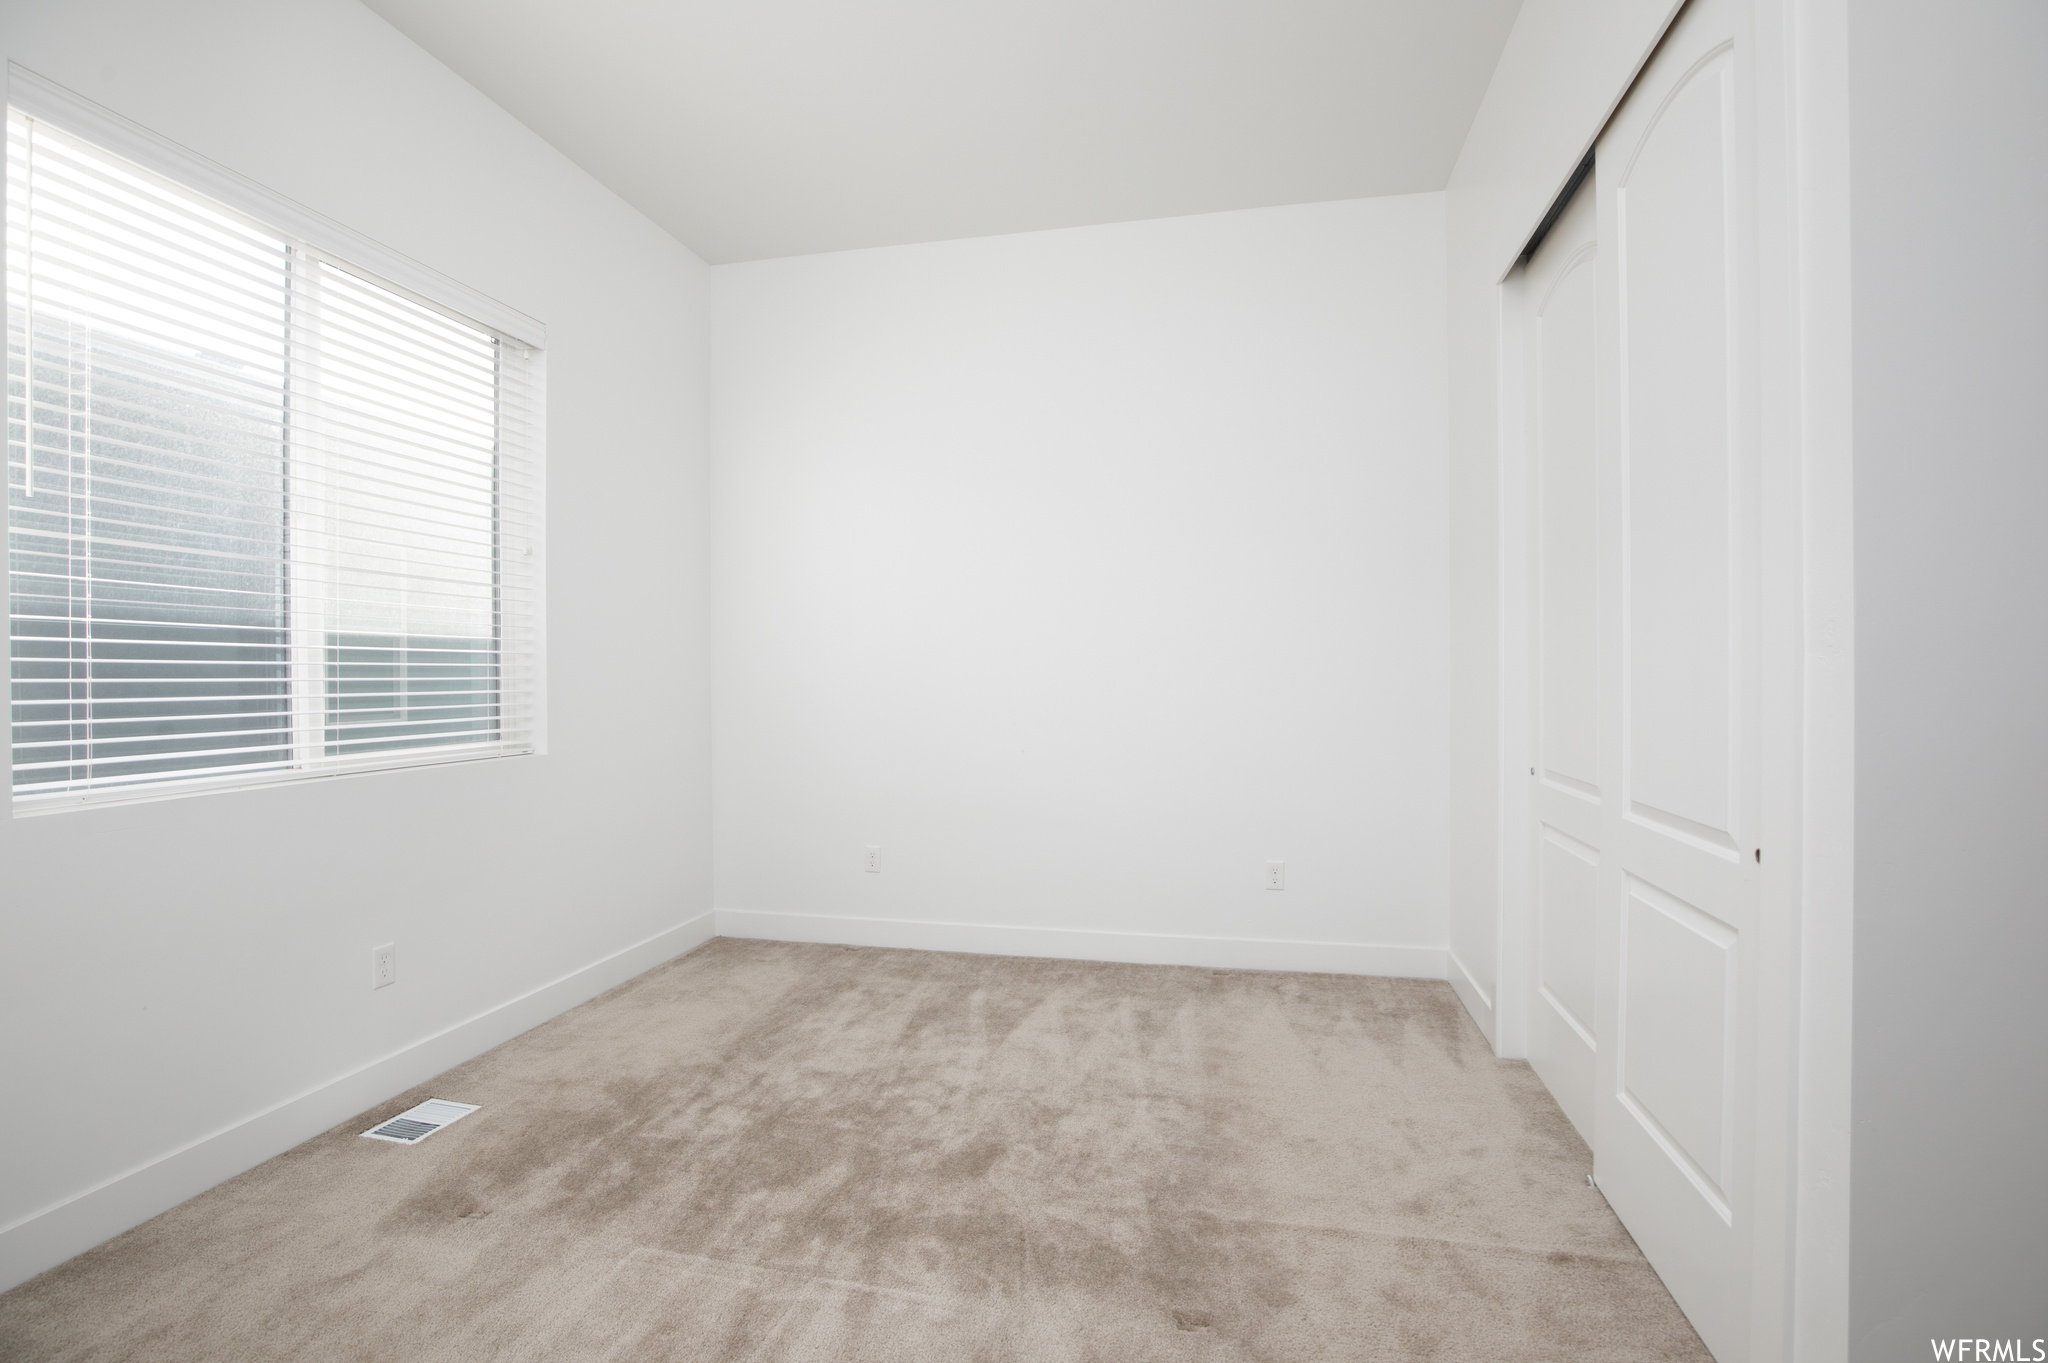 Unfurnished bedroom featuring multiple windows, light carpet, and a closet